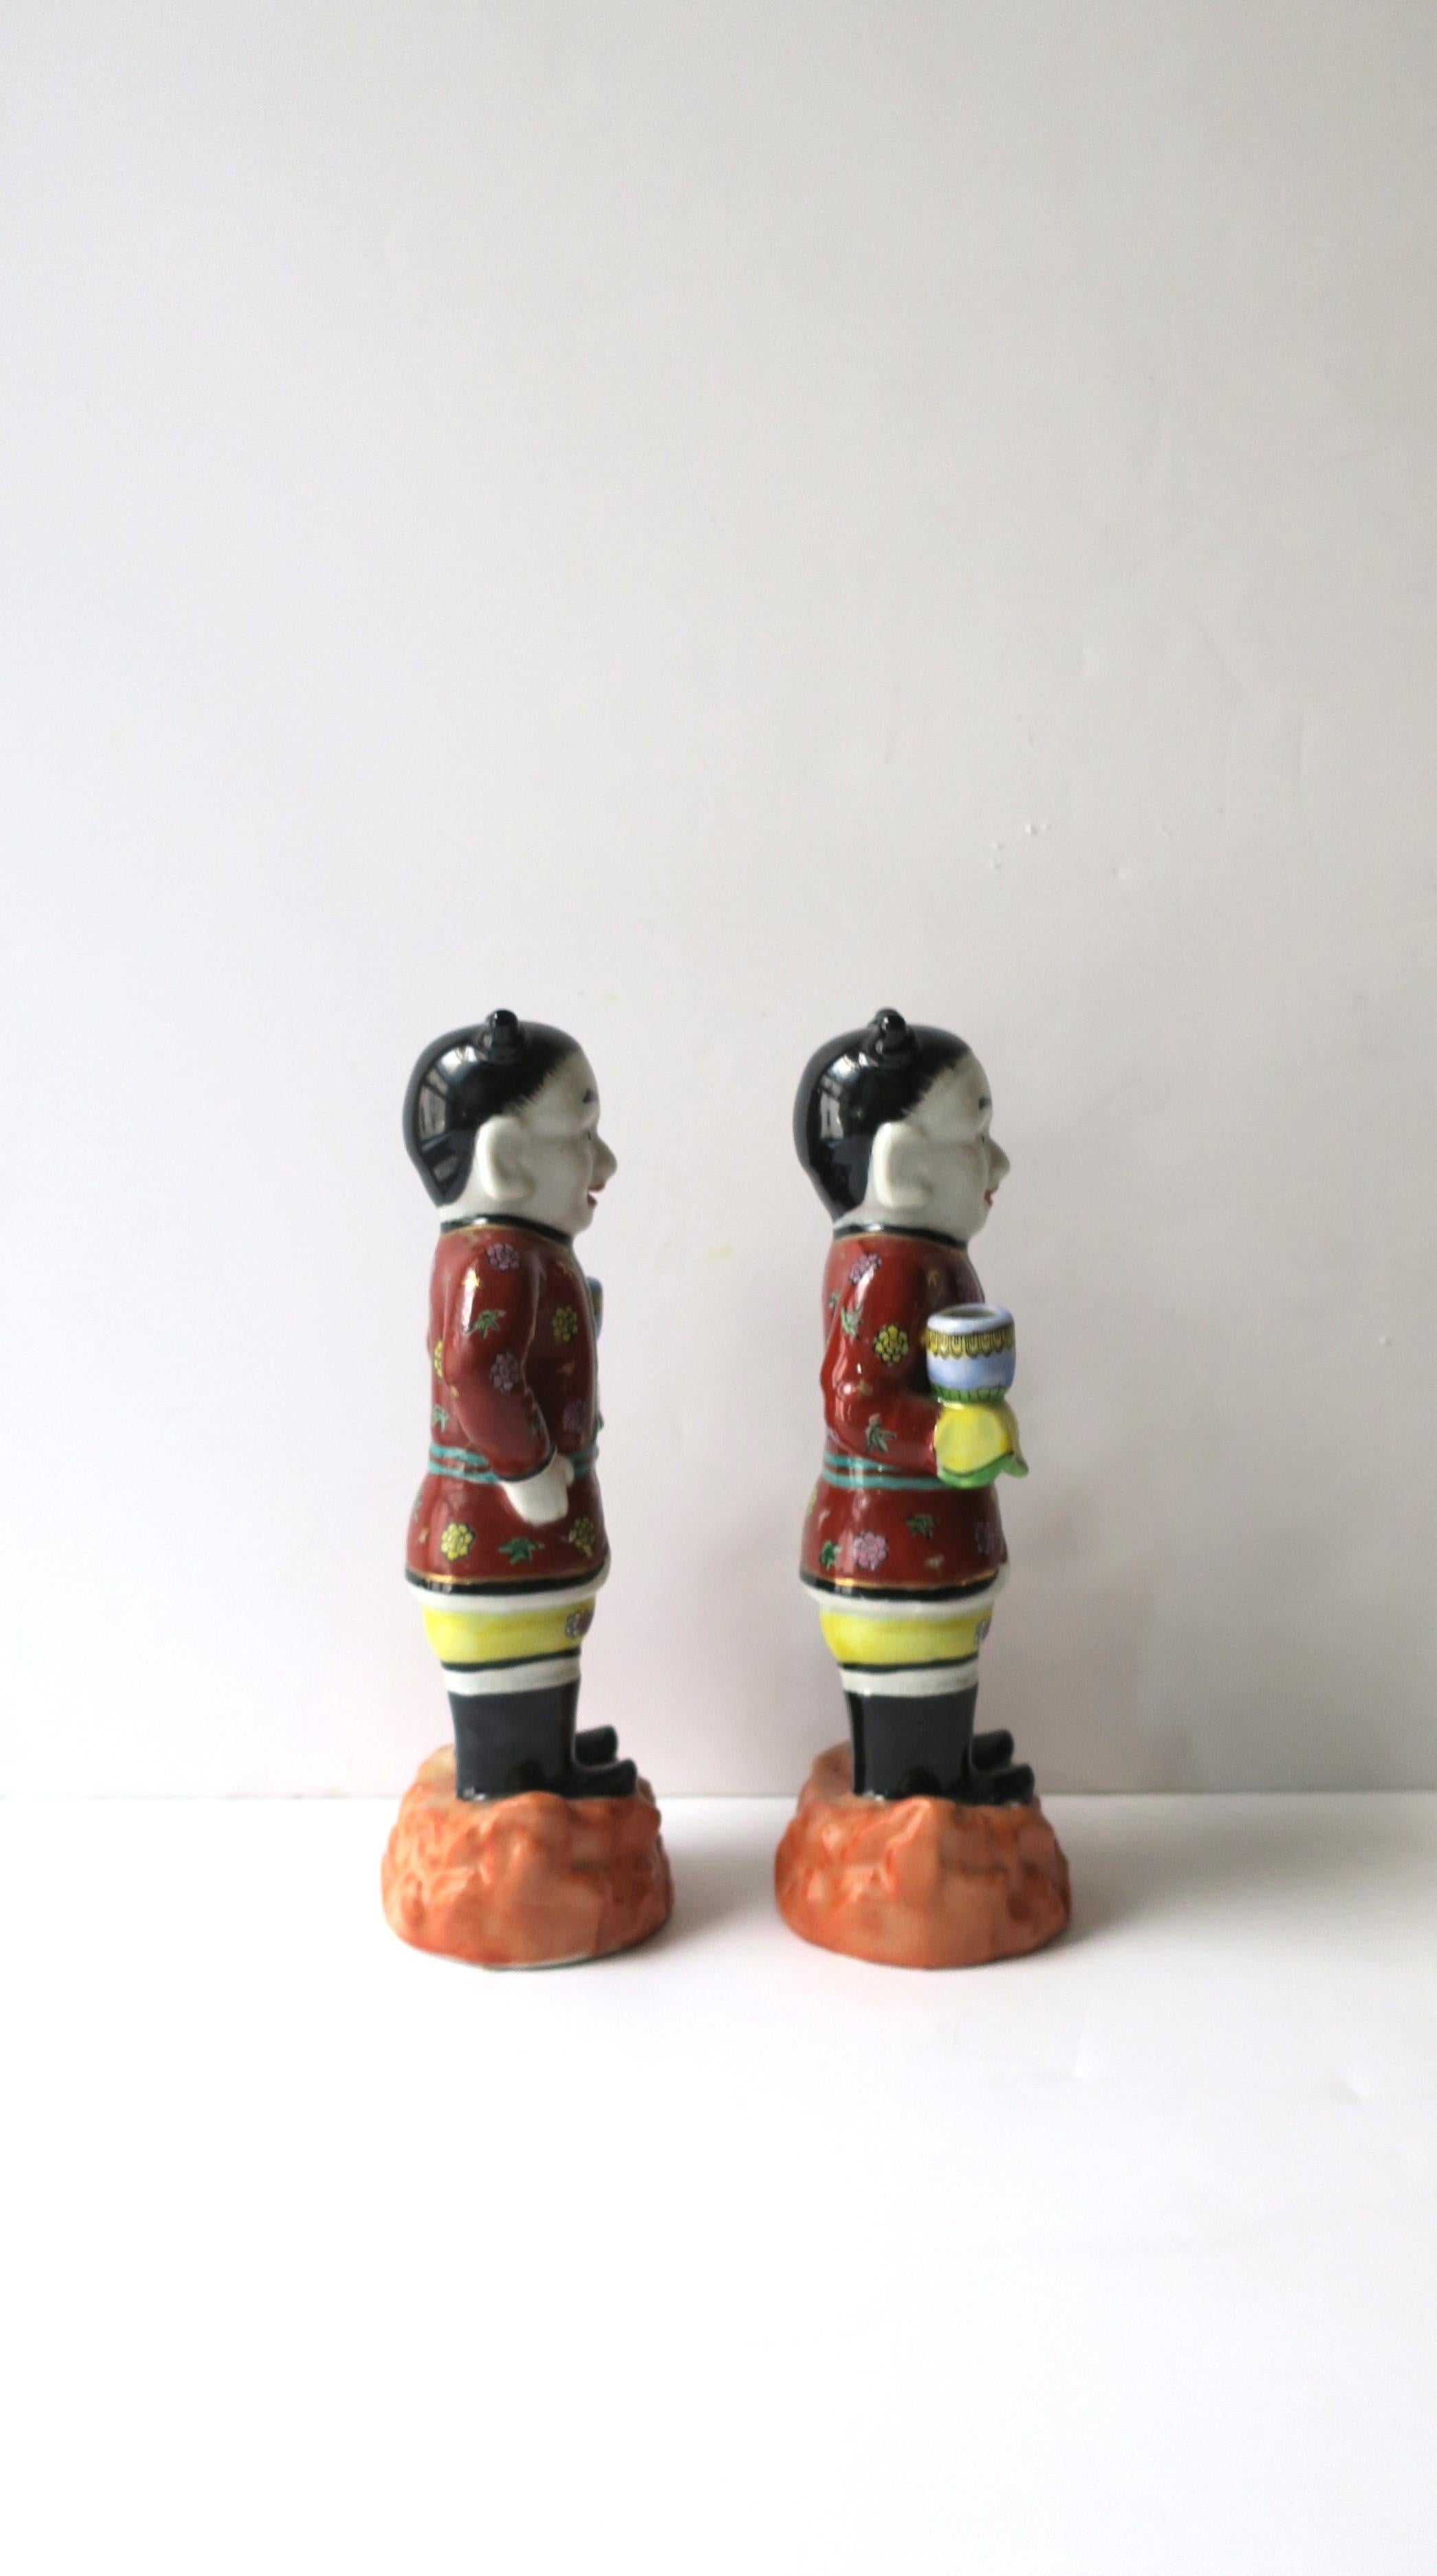 Chinoiserie Style Ceramic Male Figures Hand Painted Decorative Objects, Pair For Sale 1